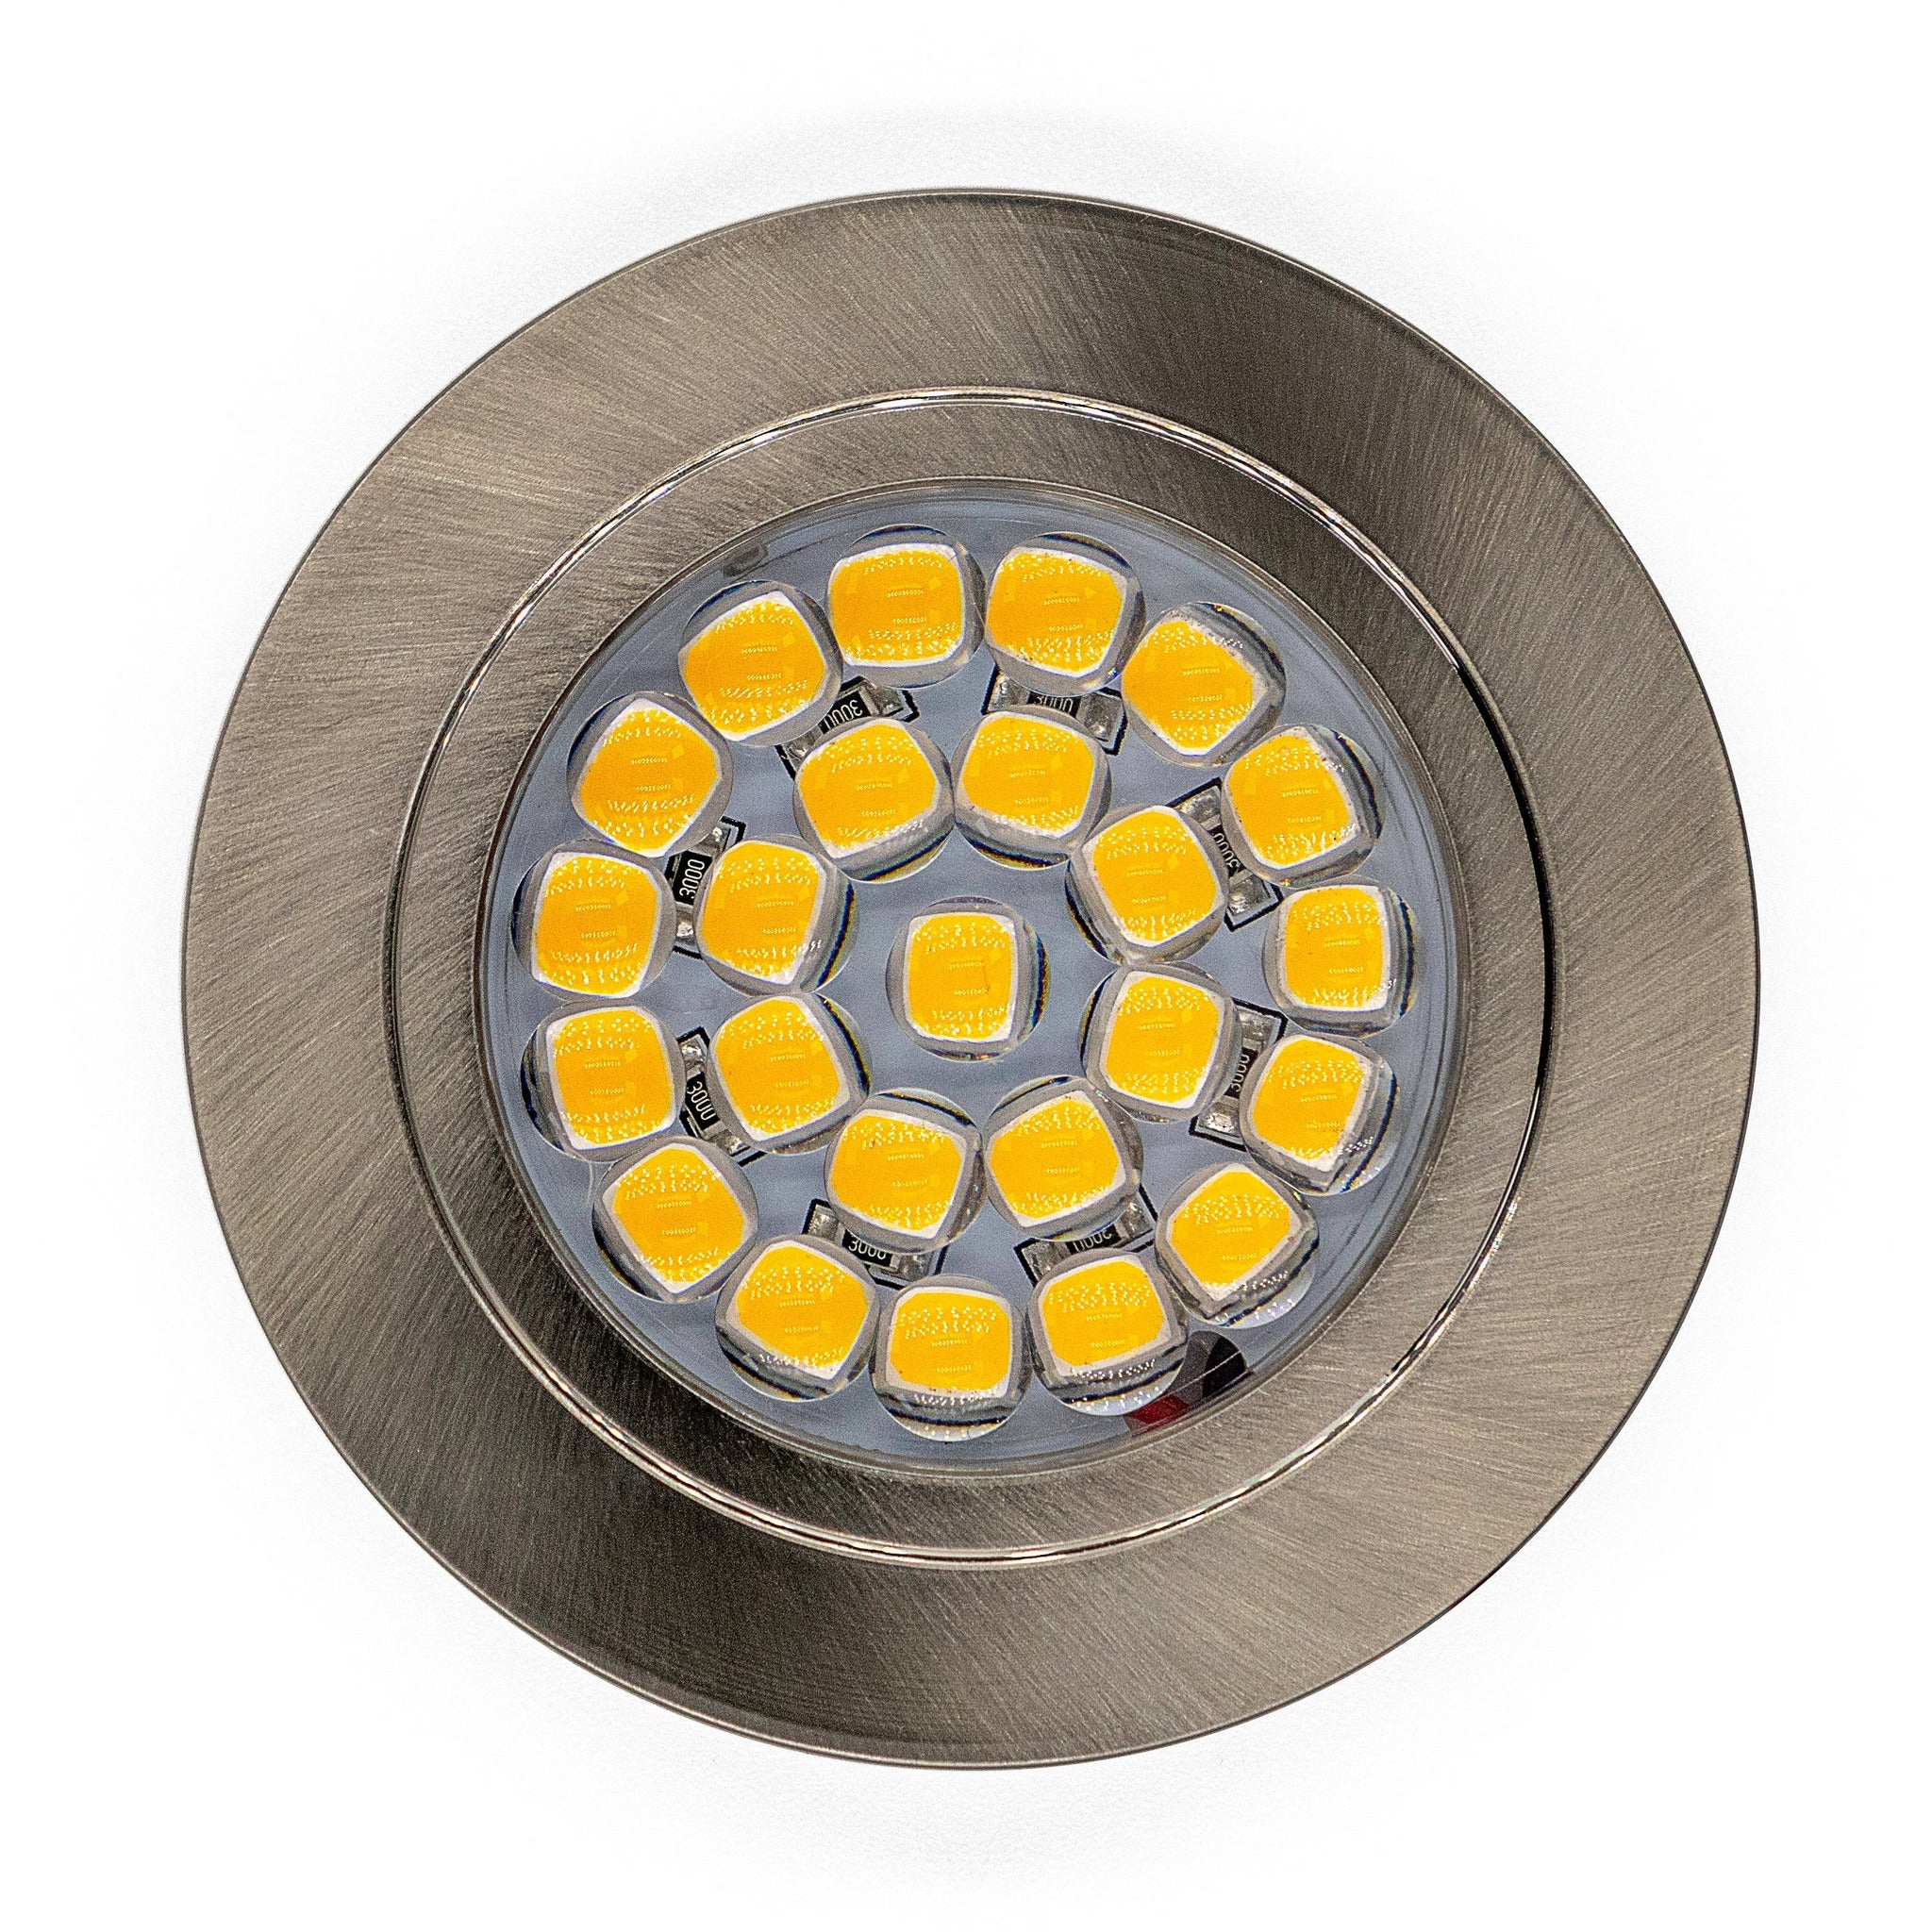 Brushed Nickel 2W 24 LED Recessed Light - Dimmable, Touch On/Off (Warm White) Kiravans 